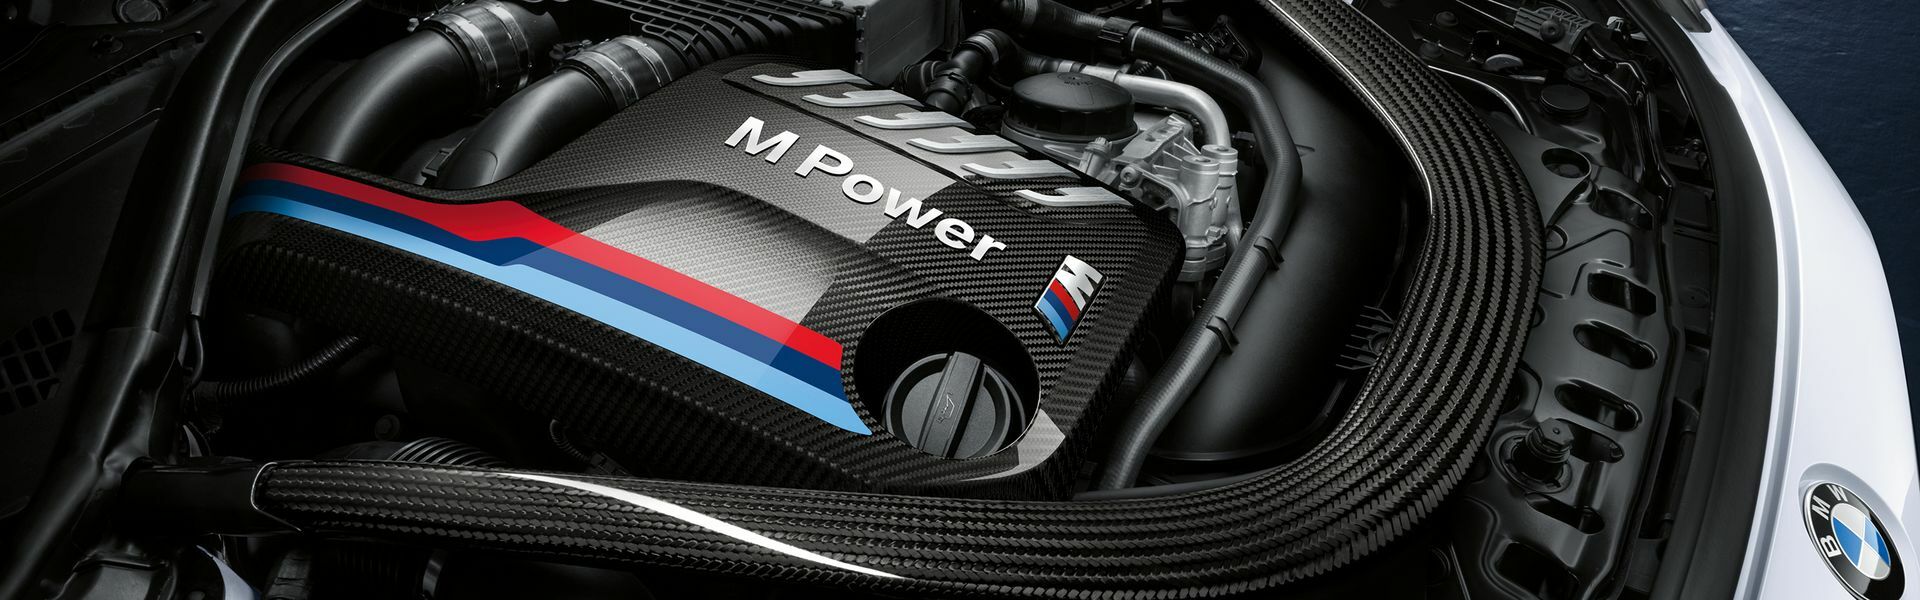 Performance enhancements/ Software modifications/ Small performance parts for BMW M6 F12, F13